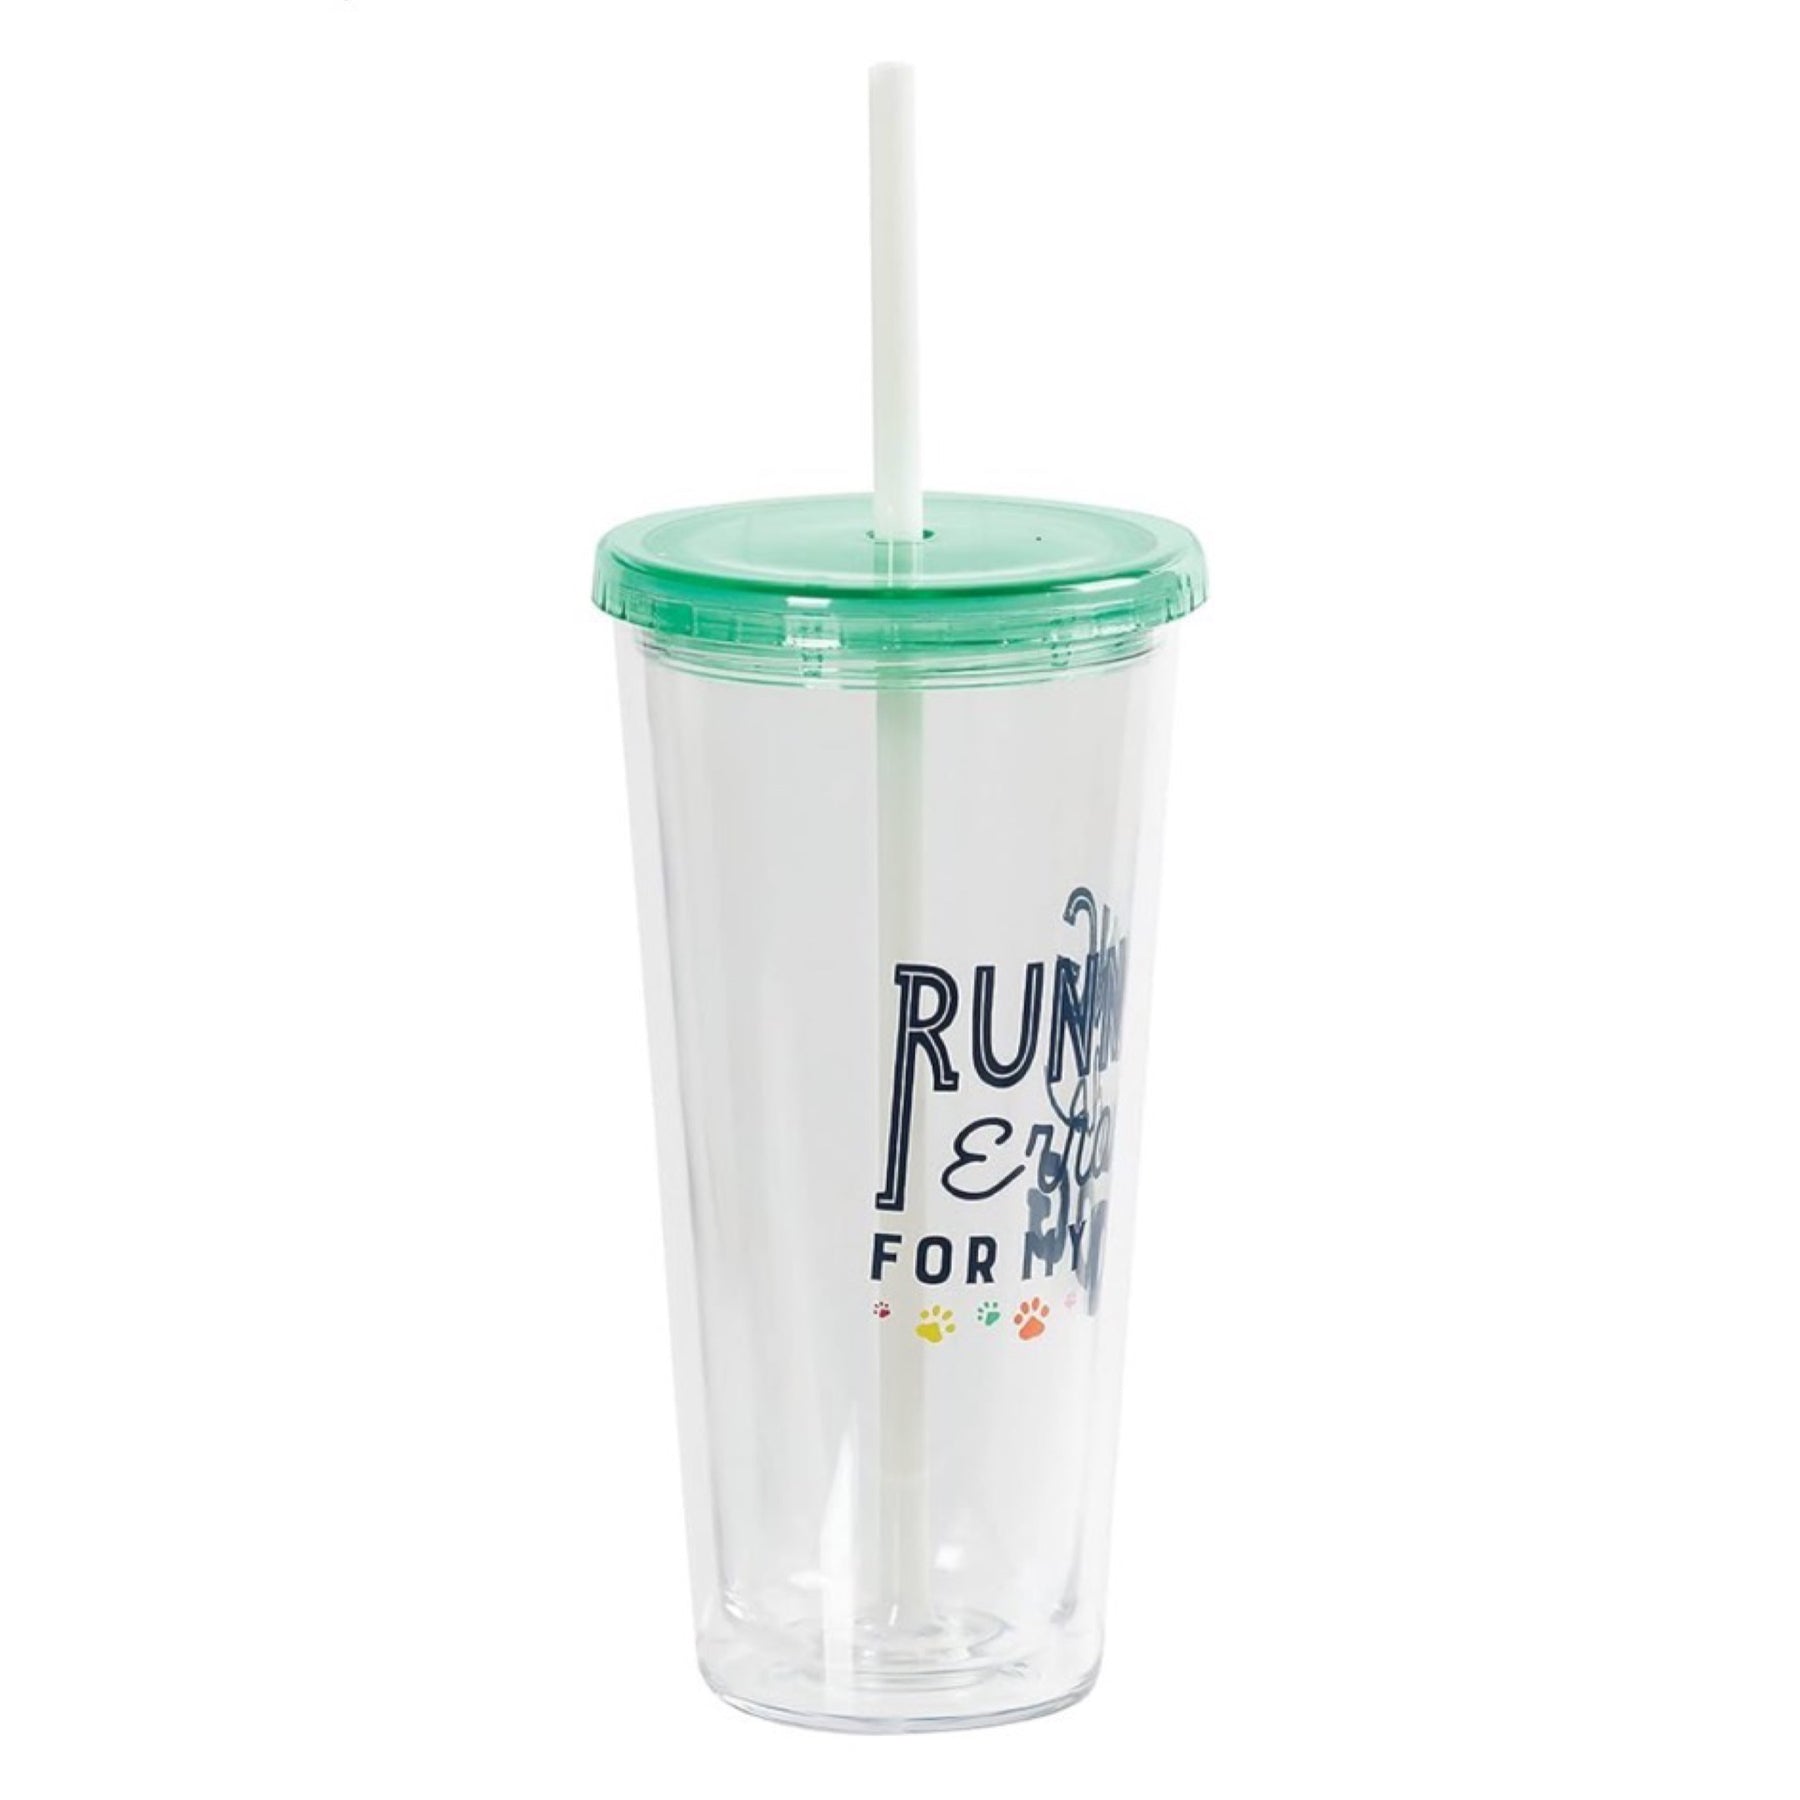 20oz "Running Errands For My Dog" Acrylic Tumbler by CR Gibson - Double Wall